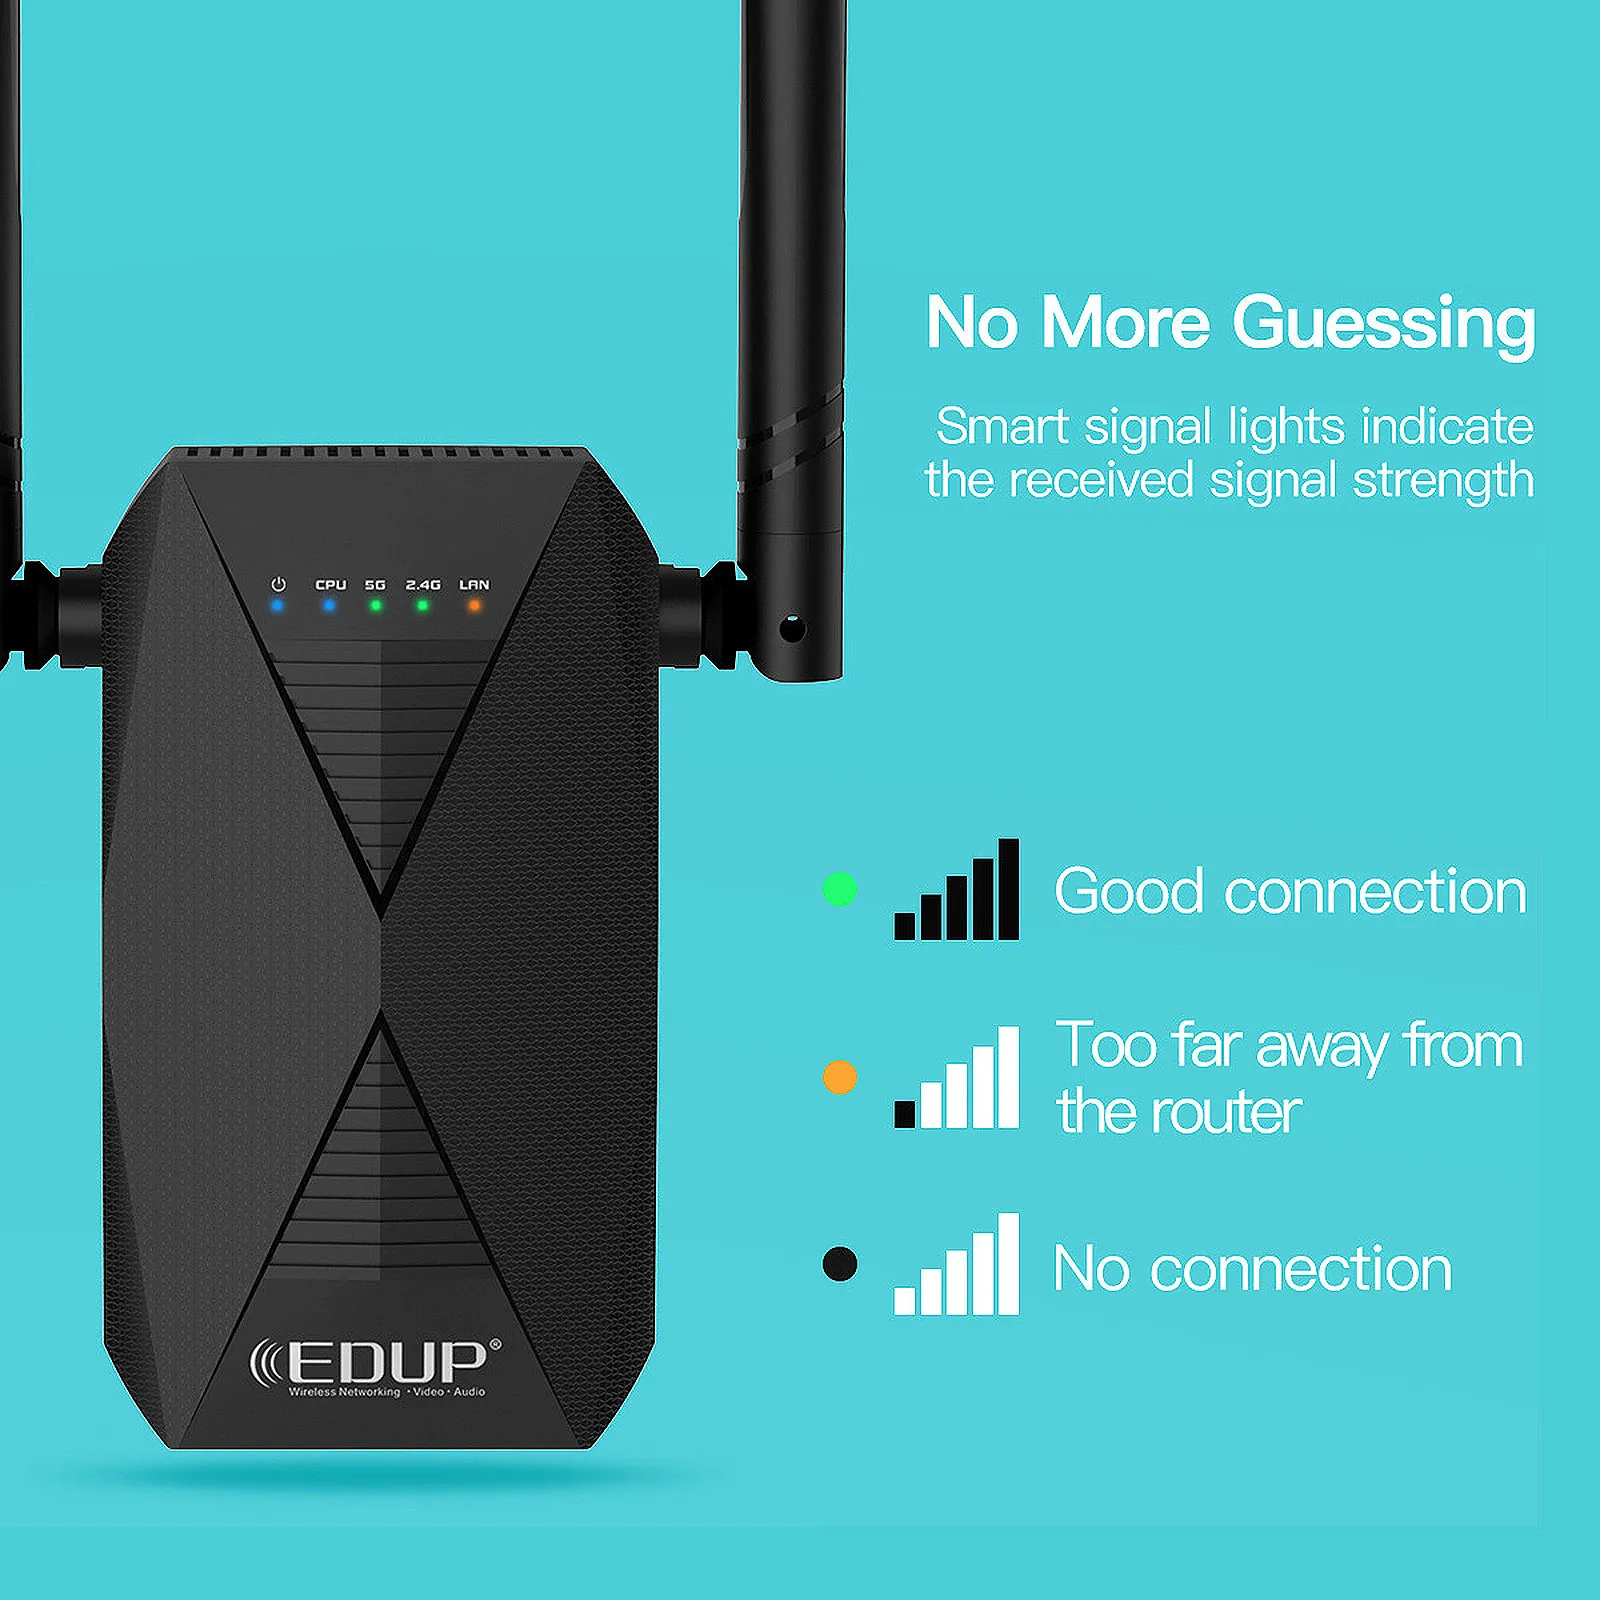 

EDUP 1200M WiFi Repeater Dual Band 2.4G&5GHz WiFi Extender Wireless 802.11AC Router Signal Booster for home Wlan Port Amplifier